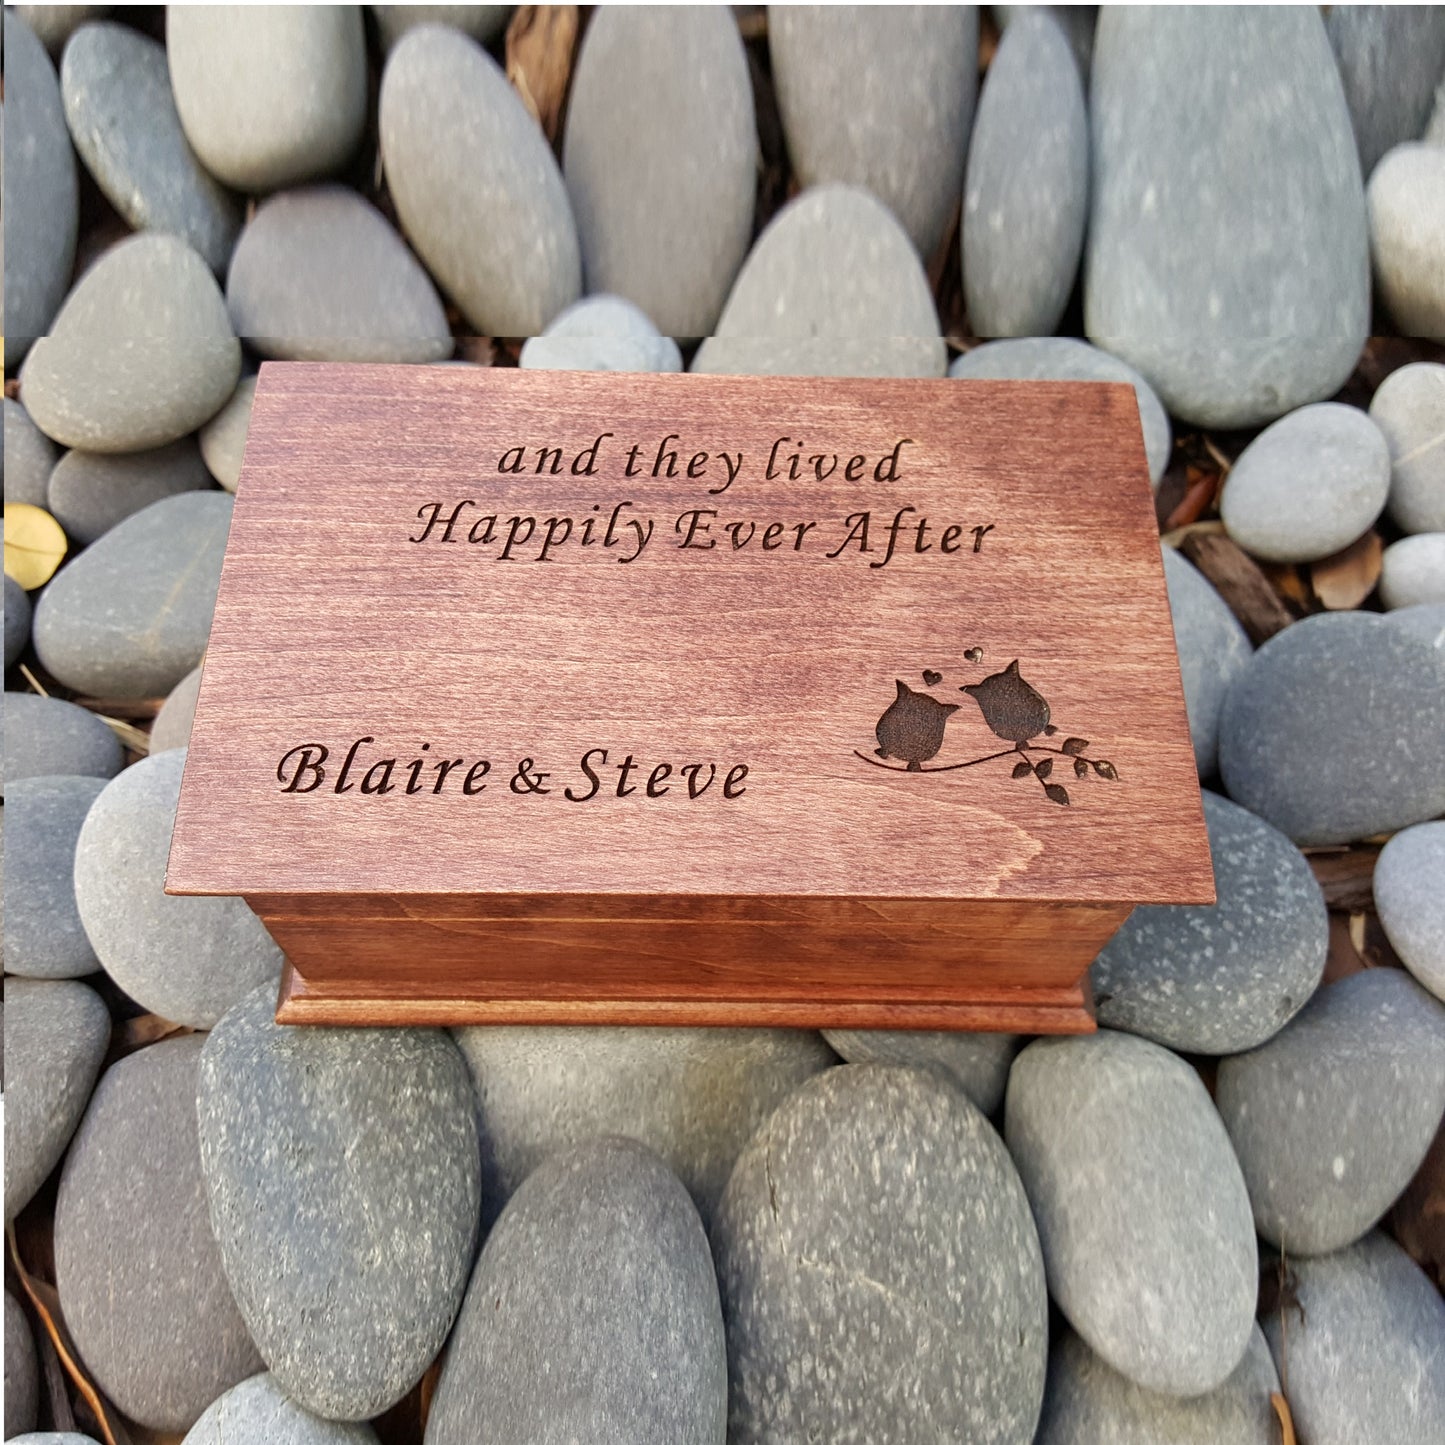 Happily Ever After jewelry box with built in music player, choose color and song